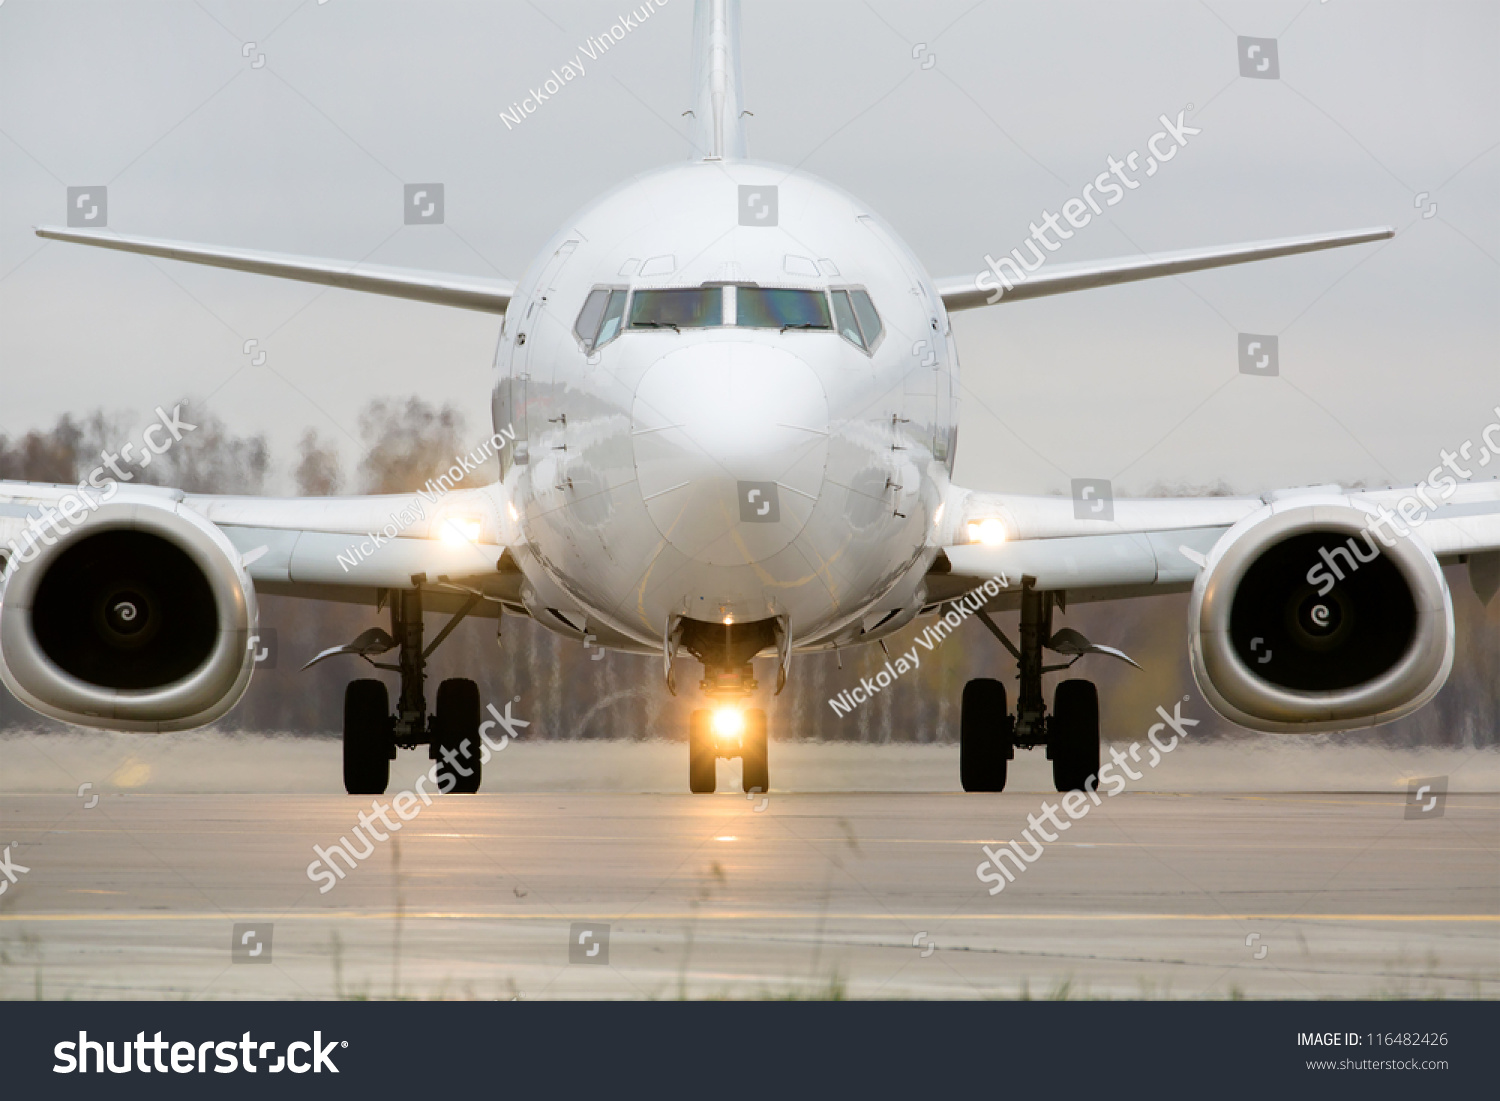 Closeup view of an aircraft preparing to take off #116482426